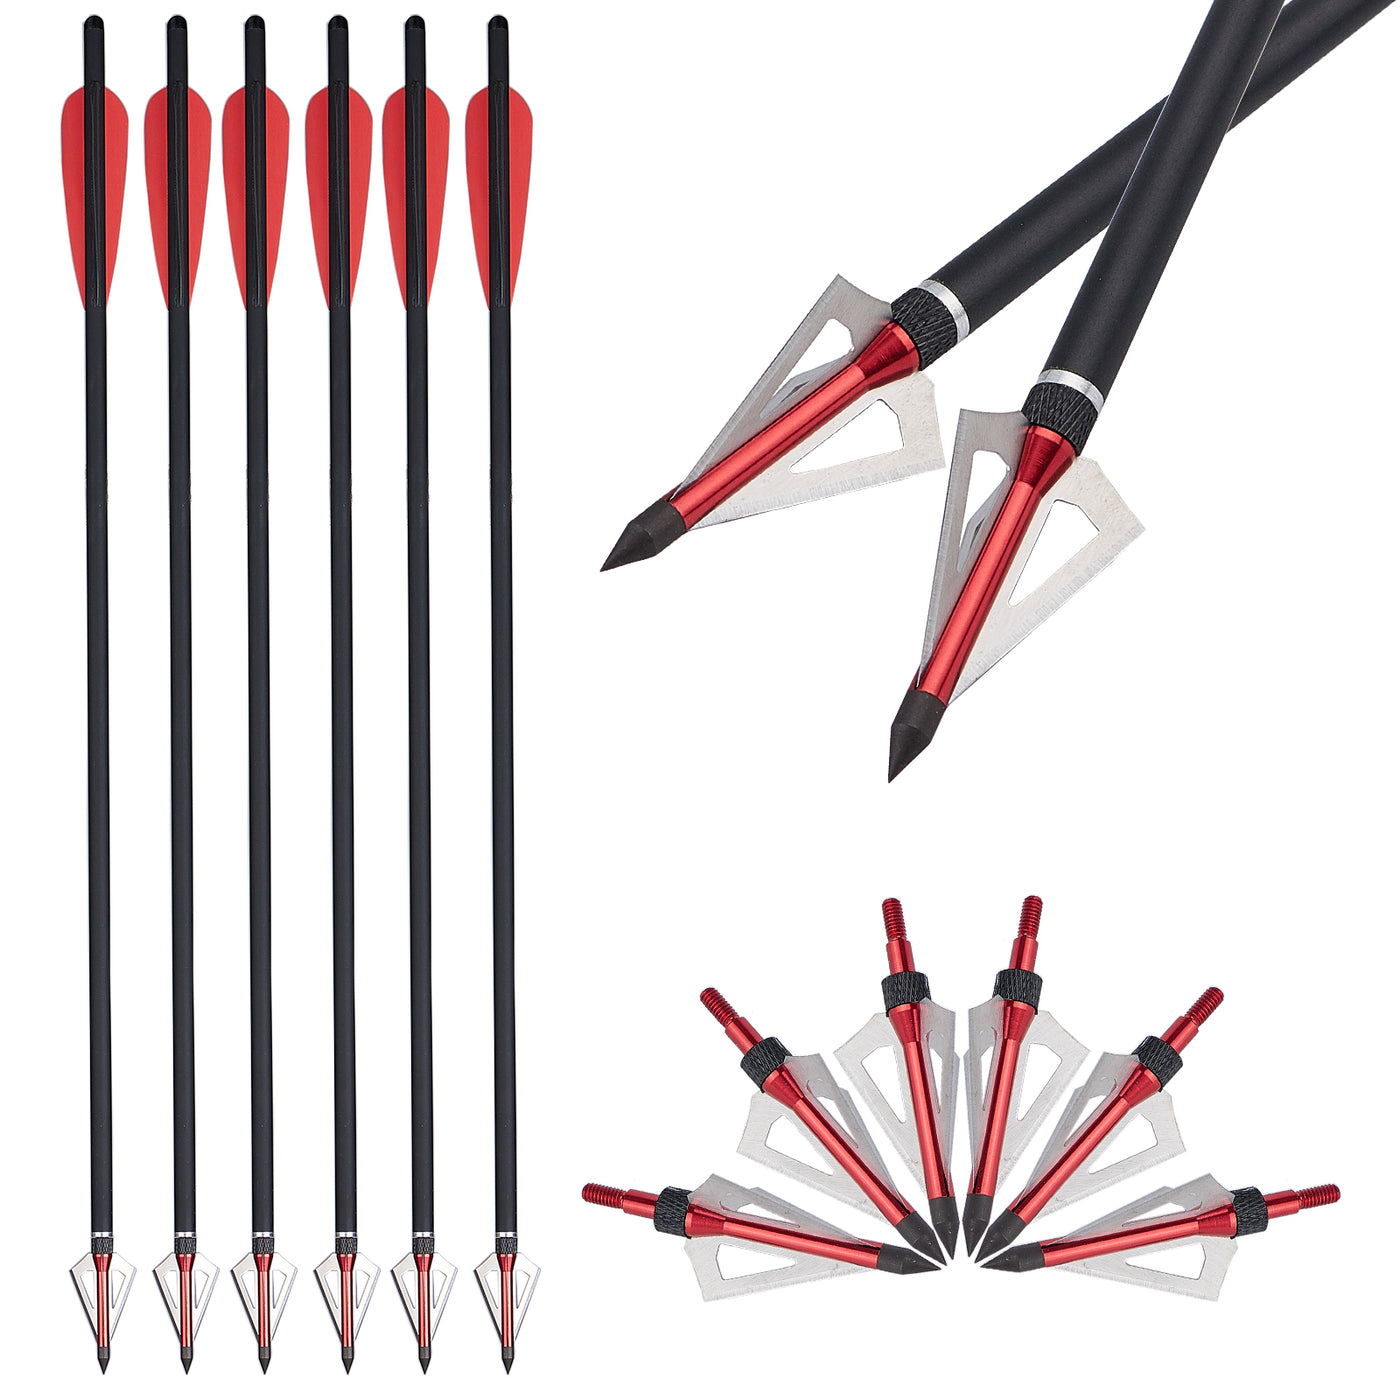 6x 20" Fletched Mixed Carbon Crossbow Archery Arrows Bolts and 6x 100-grain Broadheads